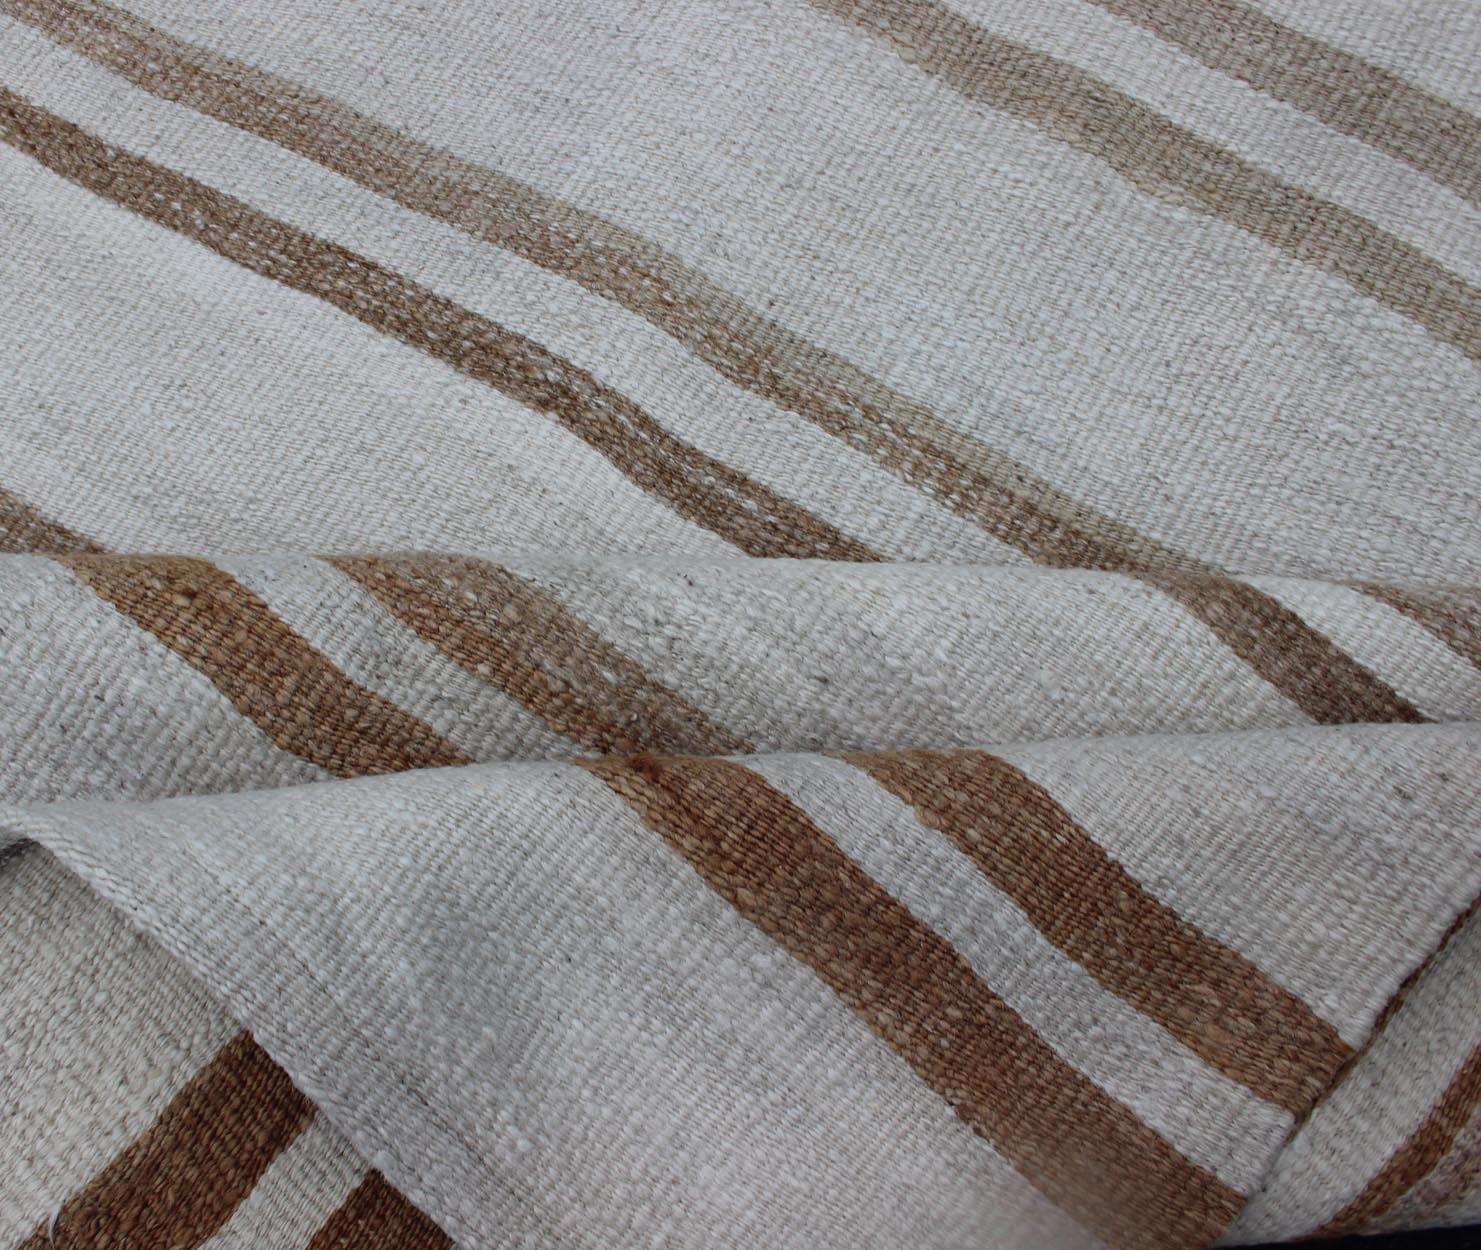 Vintage Turkish Kilim Runner with Stripe Design in Light Brown and Cream Tones For Sale 4